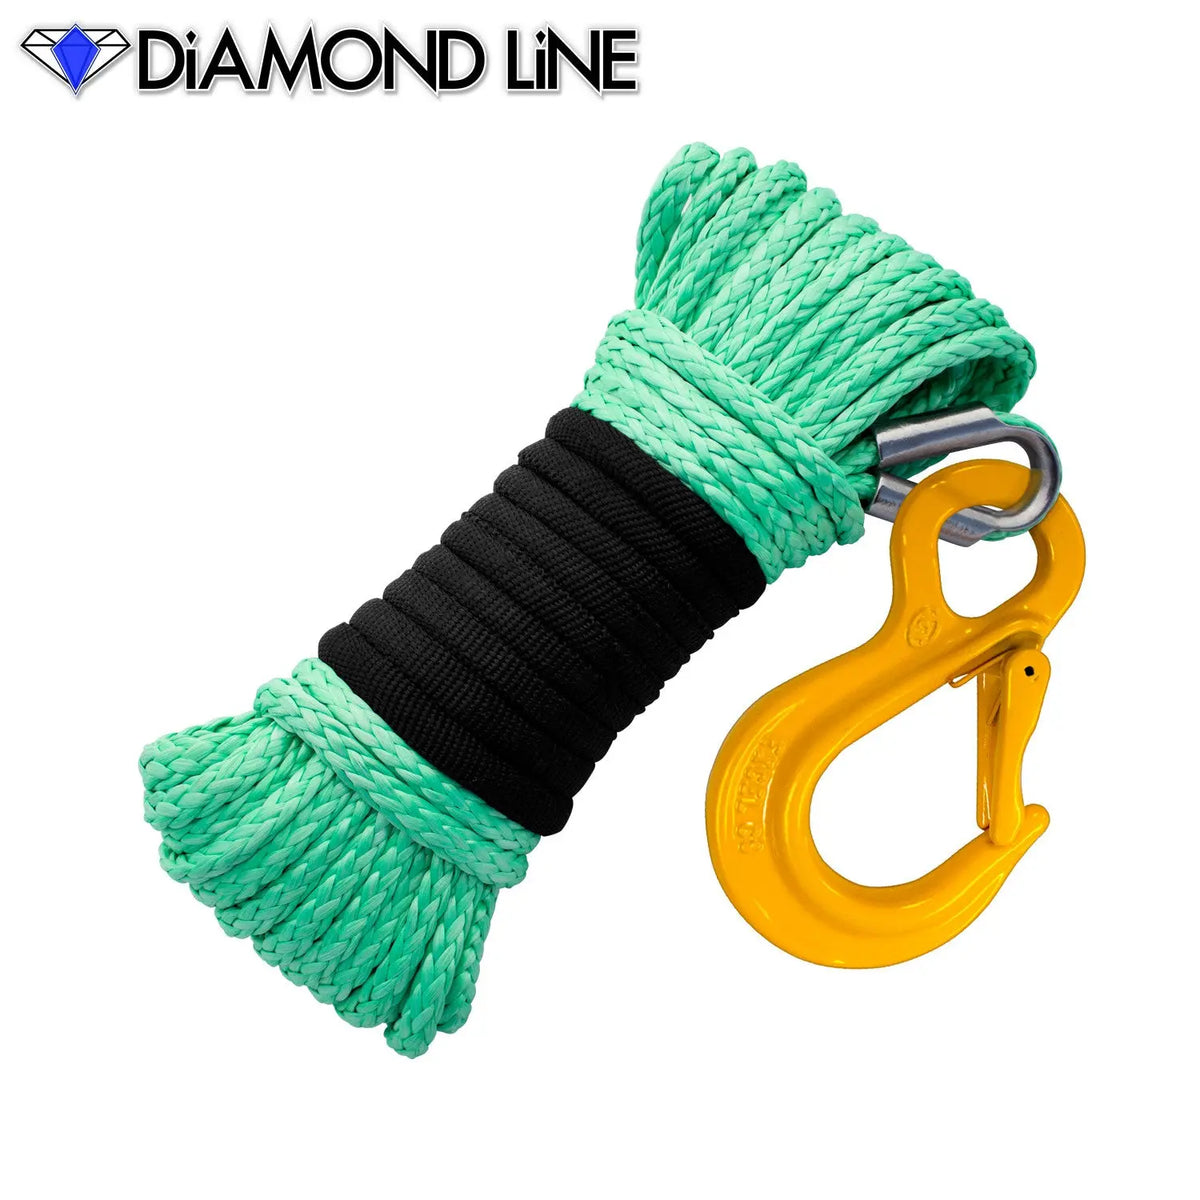 3/16" x 50' Diamond Line Winch Rope Mainline - Teal Green with Hook. 